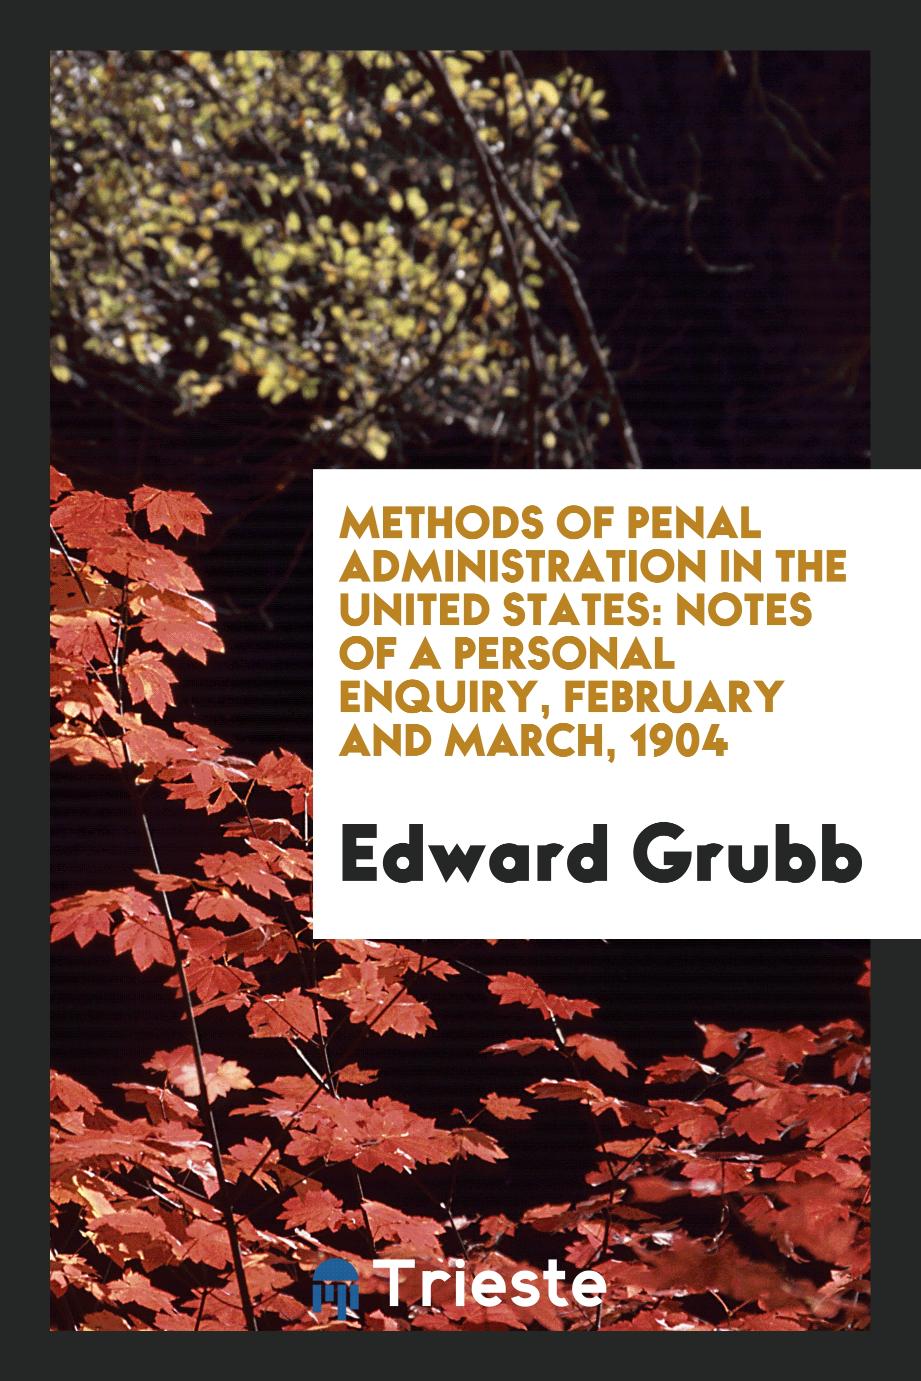 Methods of Penal Administration in the United States: Notes of a Personal Enquiry, February and March, 1904